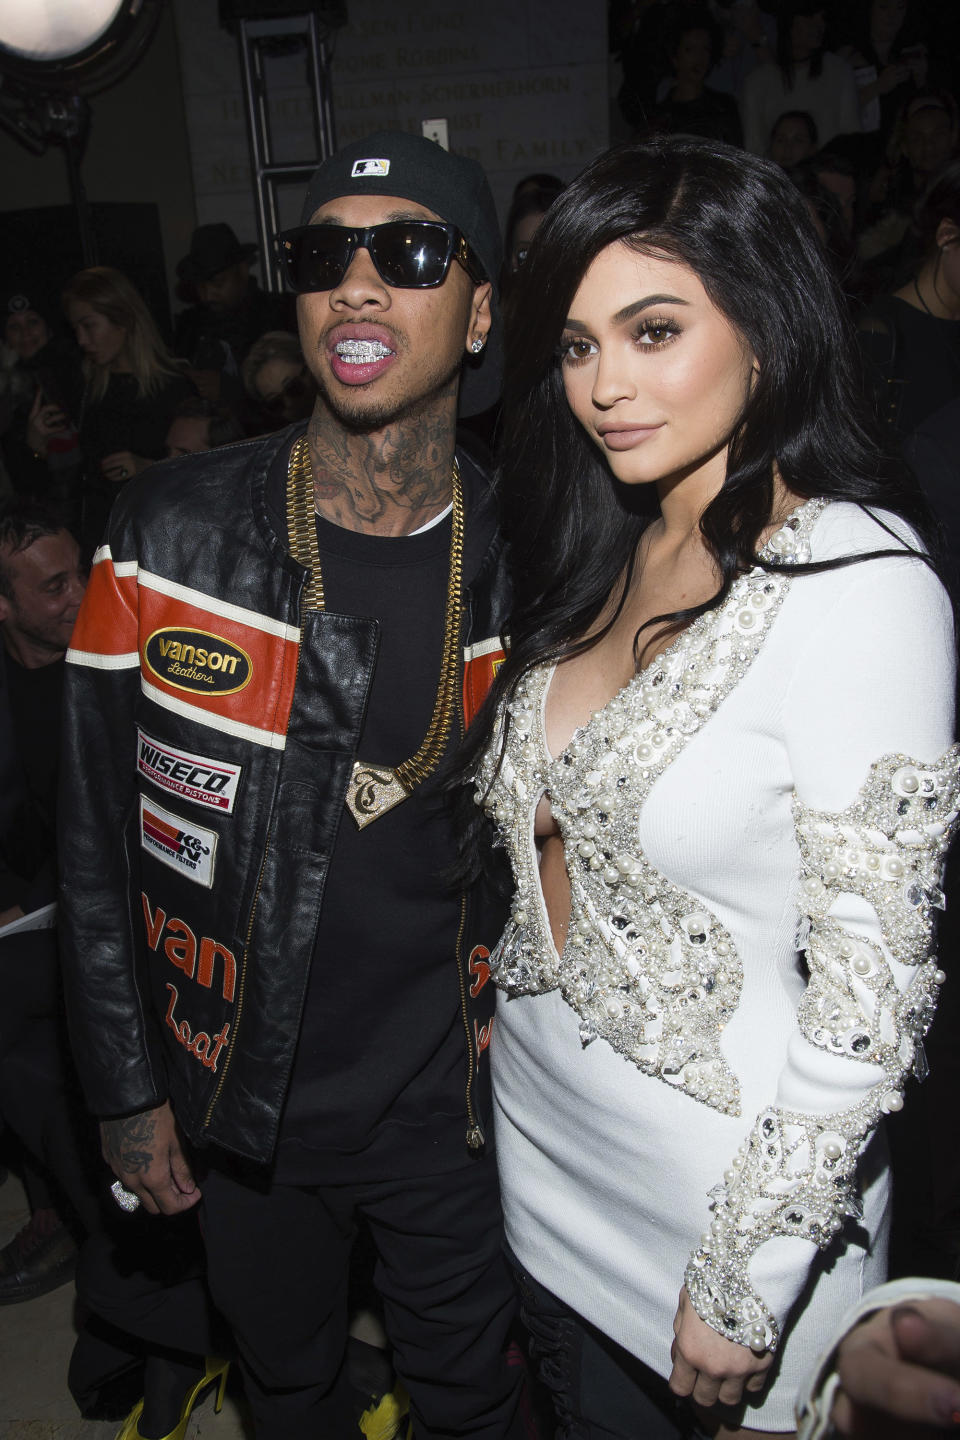 Tyga, left, and Kylie Jenner attend the Philipp Plein show during Fashion Week on Monday, Feb. 13, 2017, in New York. (Photo by Charles Sykes/Invision/AP)